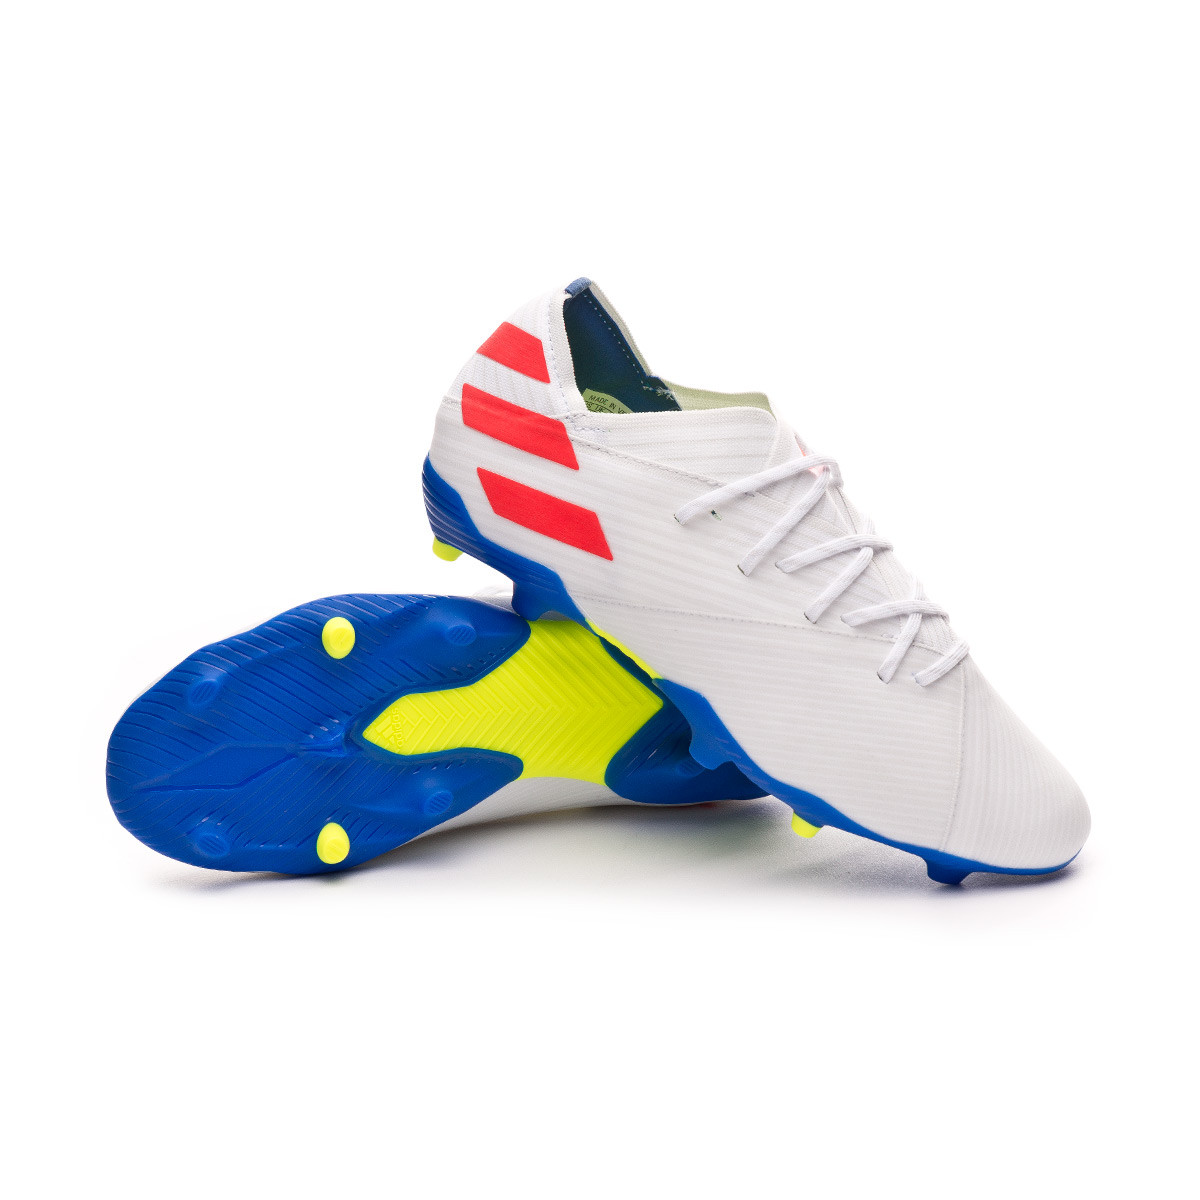 white and red football boots